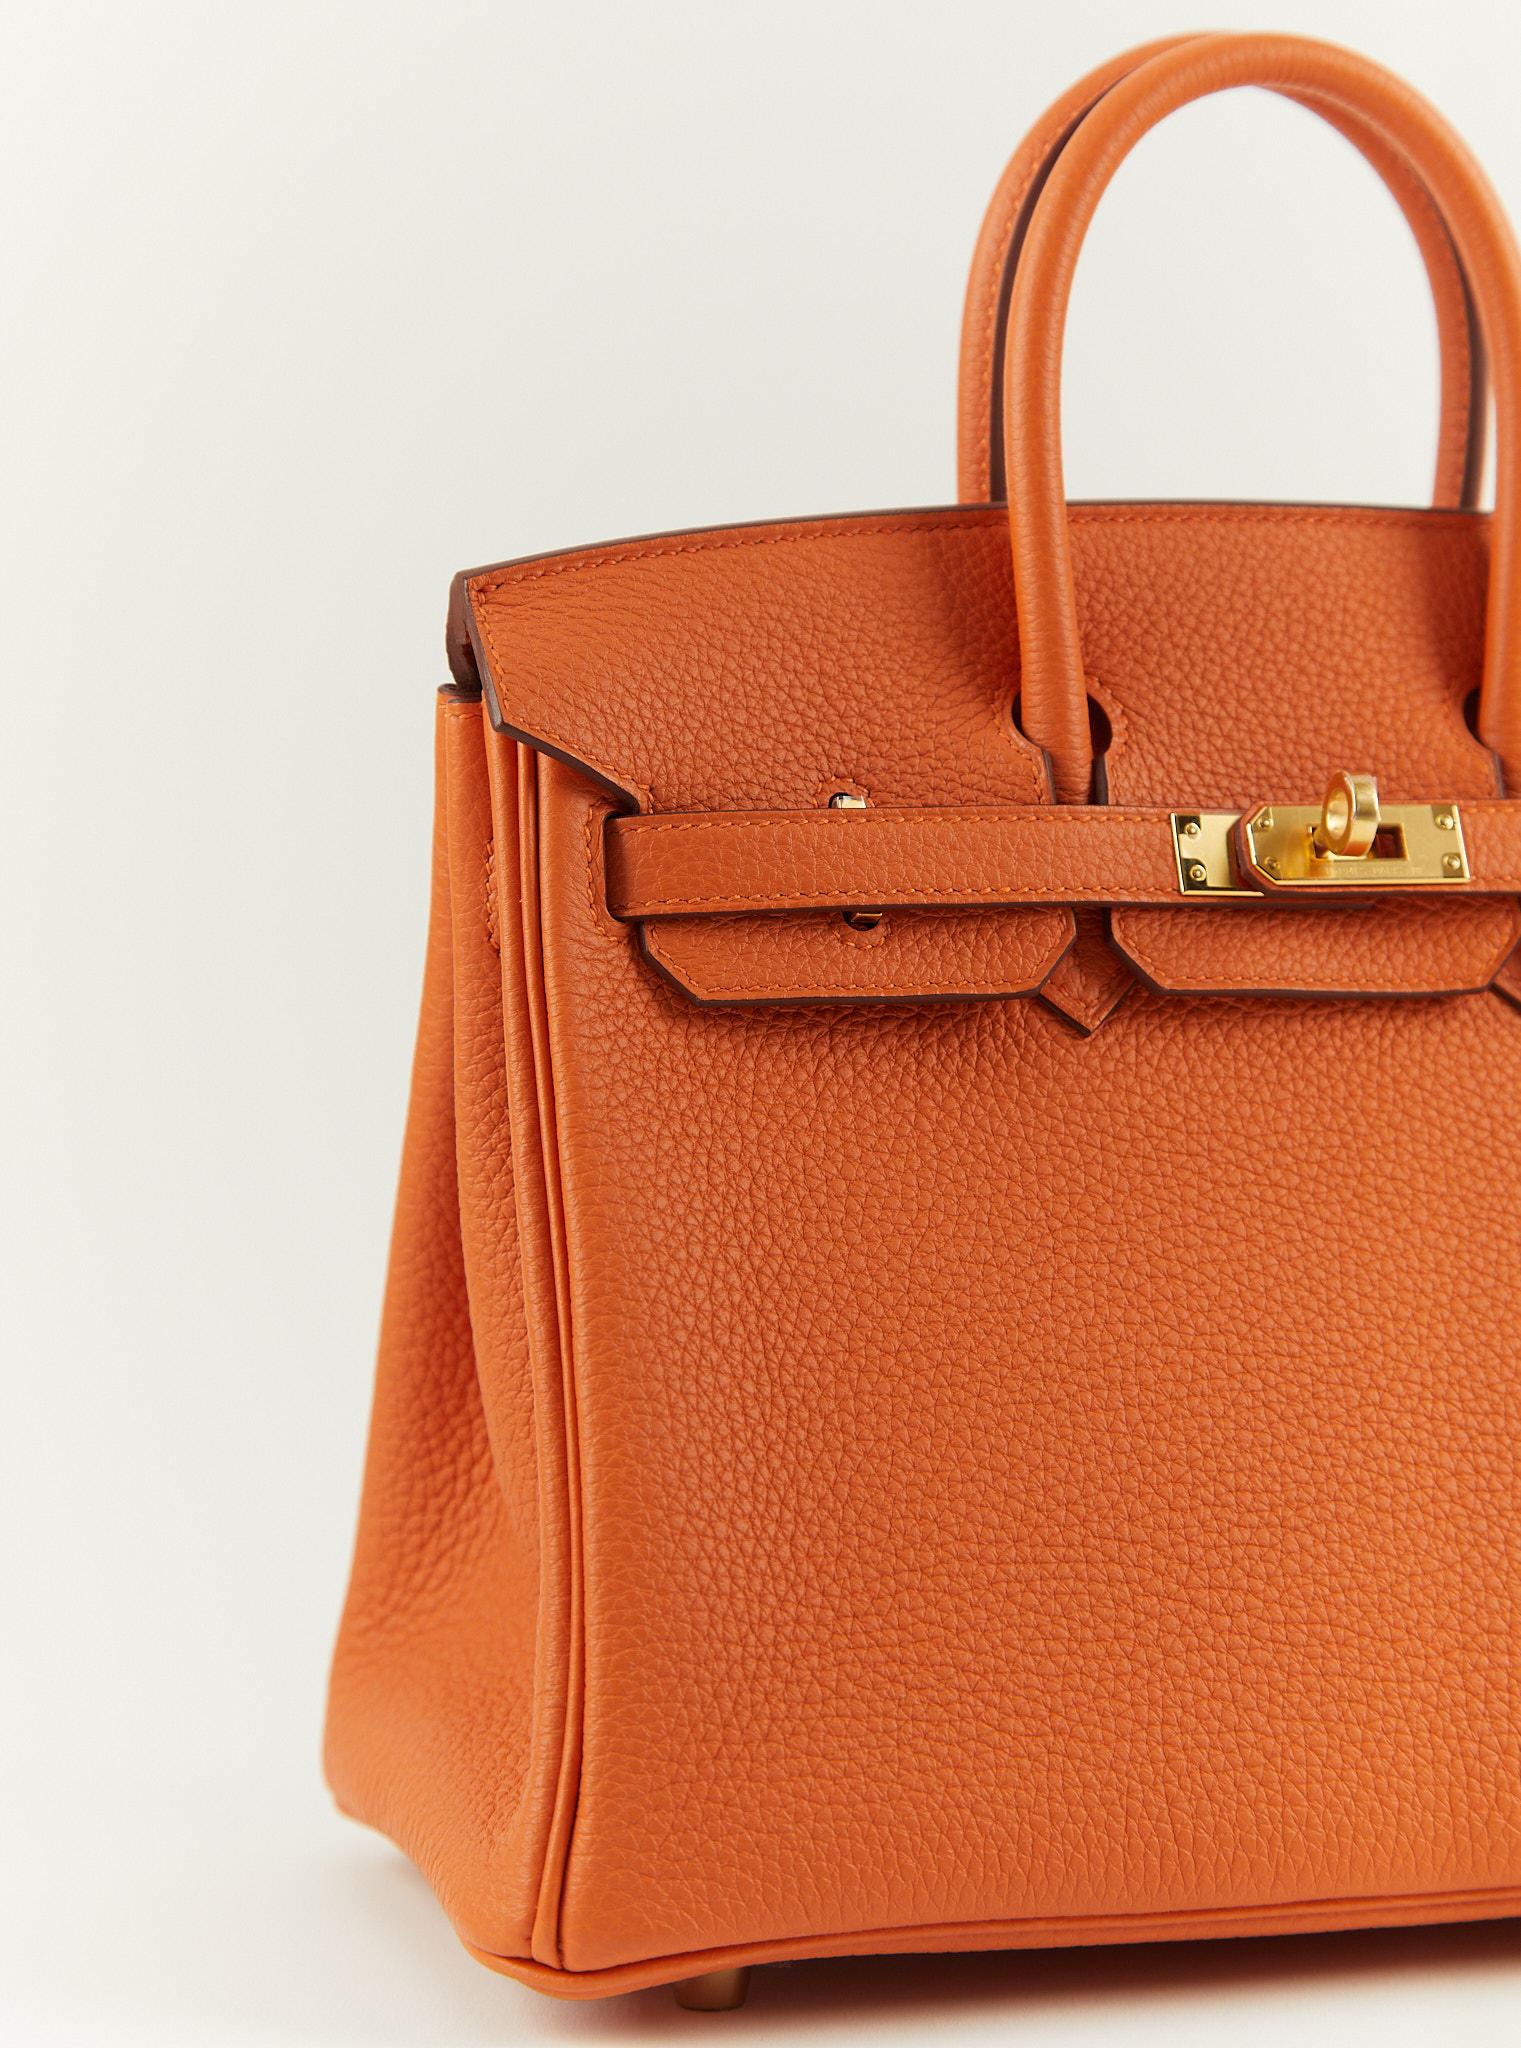 HERMÈS BIRKIN 25CM ORANGE Togo Leather with Gold Hardware In Excellent Condition For Sale In London, GB